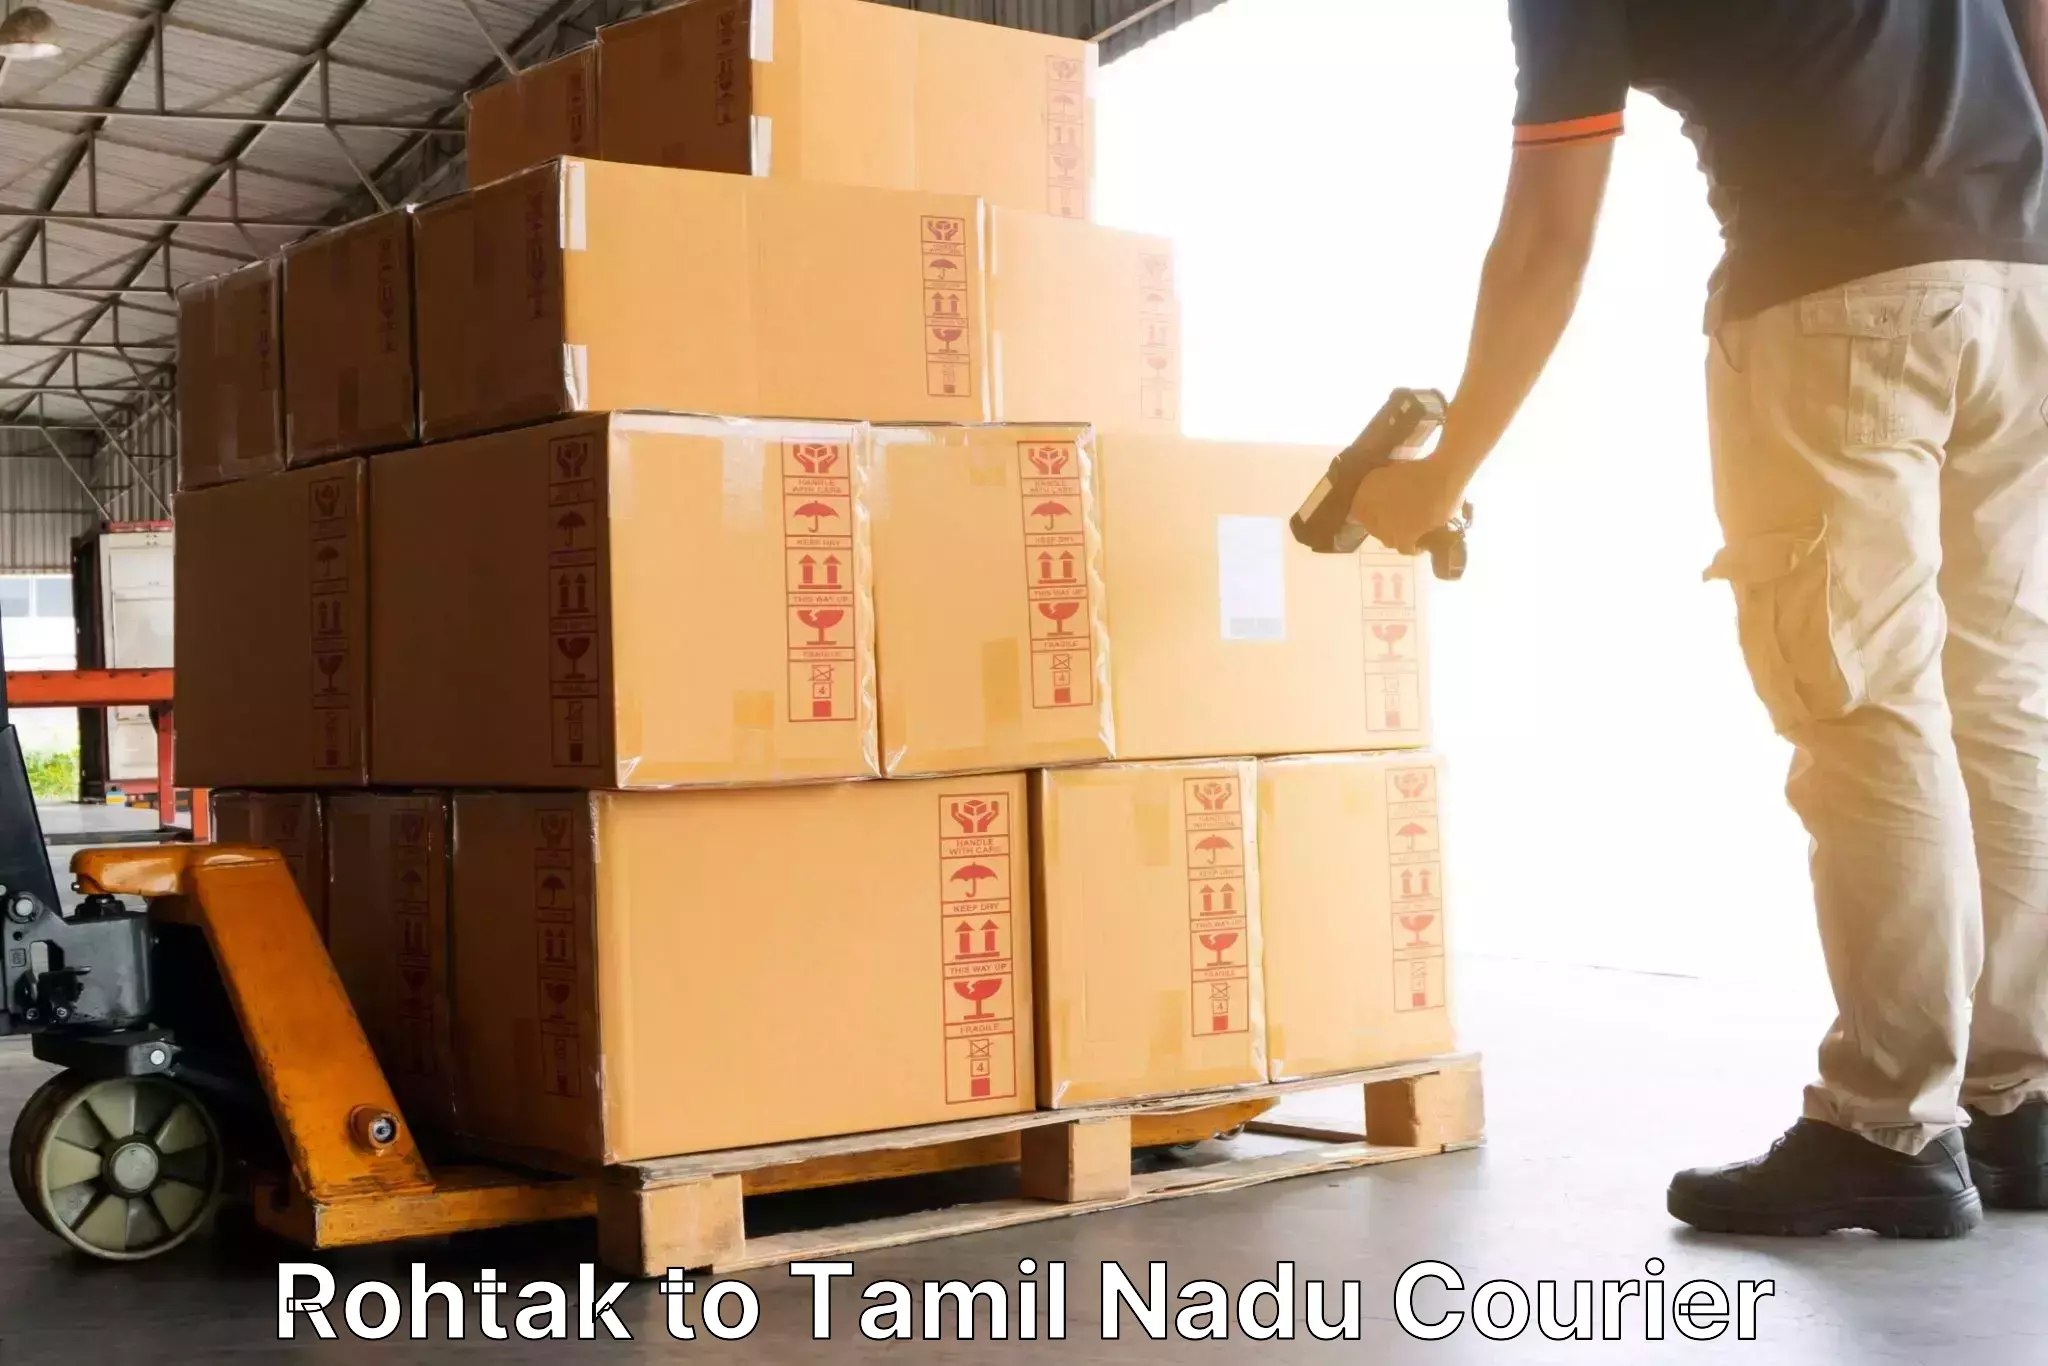 Easy access courier services Rohtak to Vedasandur